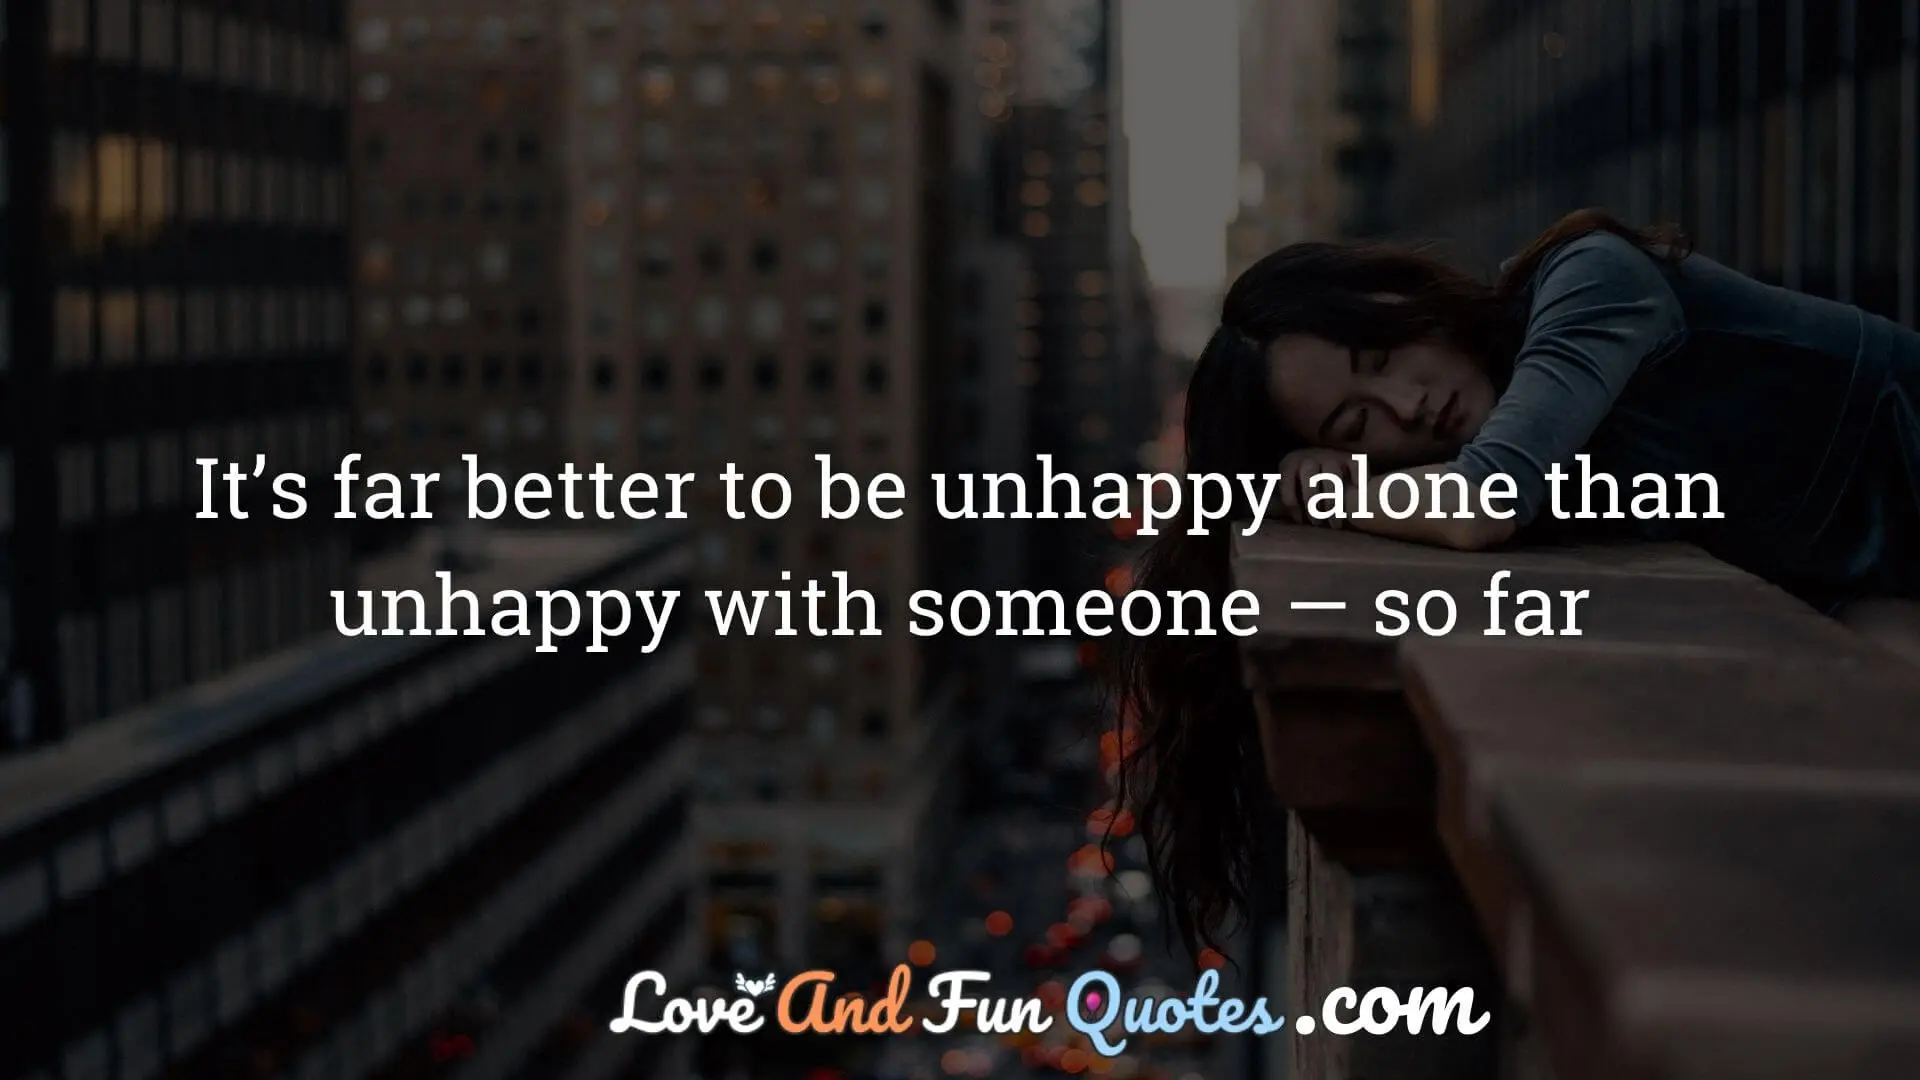 It’s far better to be unhappy alone than unhappy with someone — so far